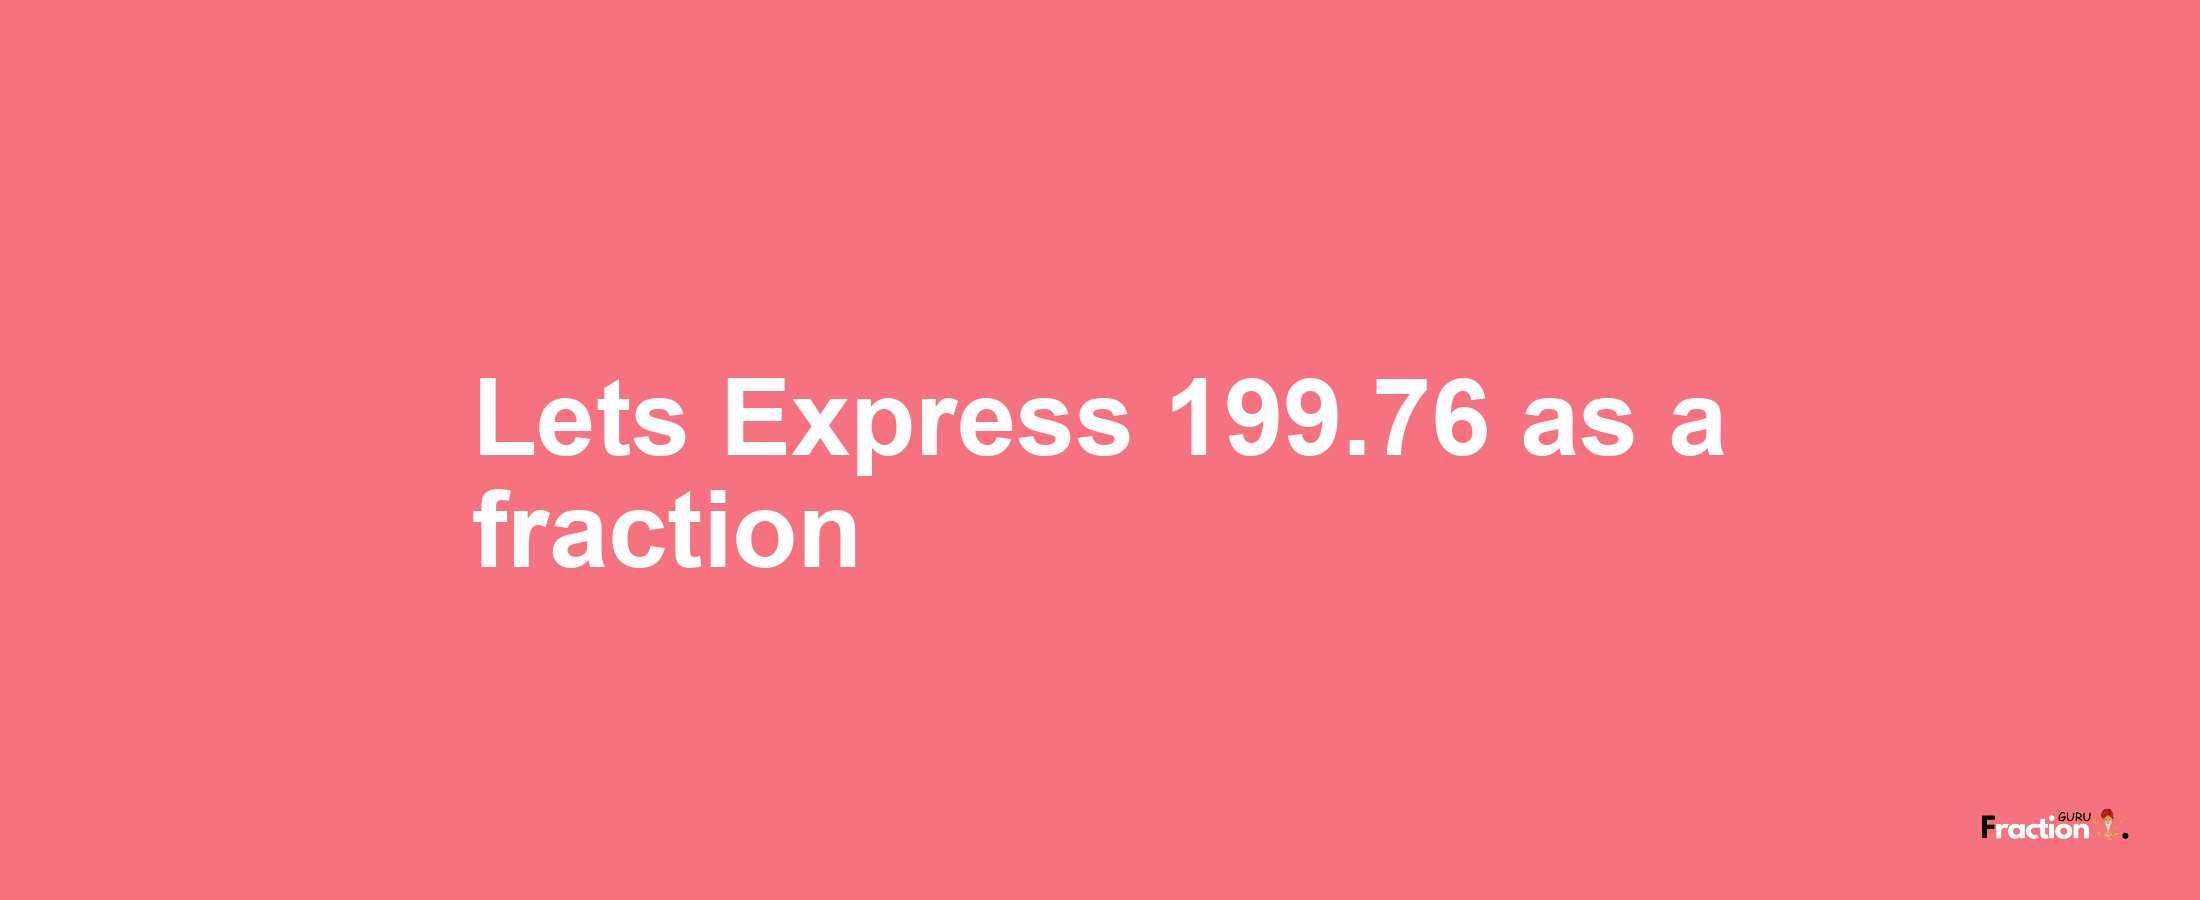 Lets Express 199.76 as afraction